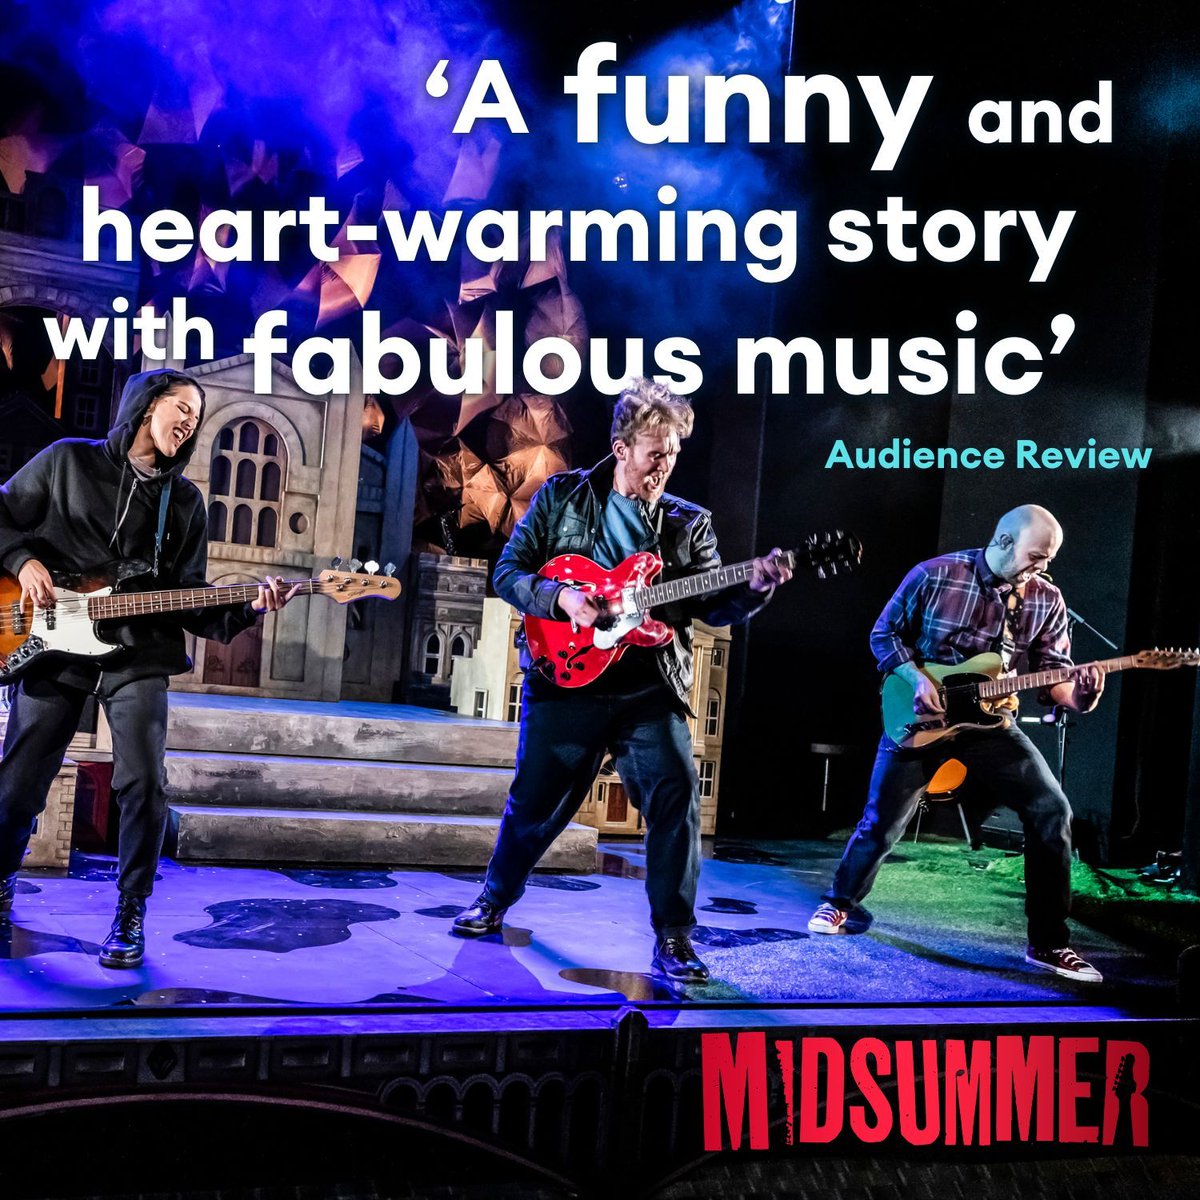 ☂ Audiences are loving #Midsummer! Have you joined us this weekend? Let us know your thoughts in the comments below...🎸

Not booked yet? Get your tickets here: buff.ly/4bmUMX9